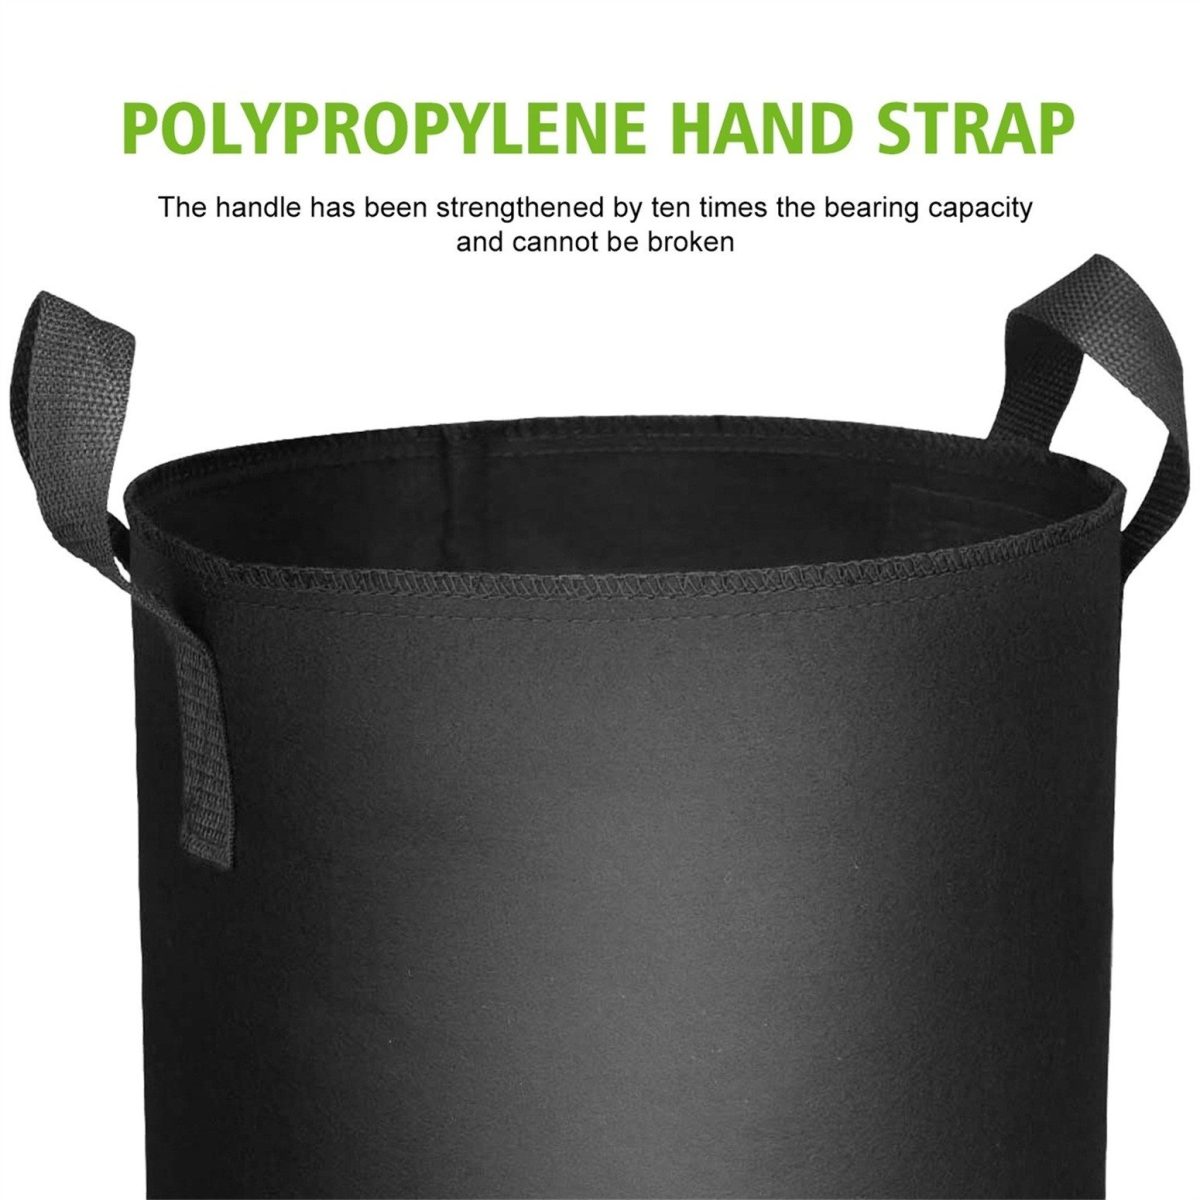 The mars hydro grow bags use polypropylene hand straps - durable and weight bearing